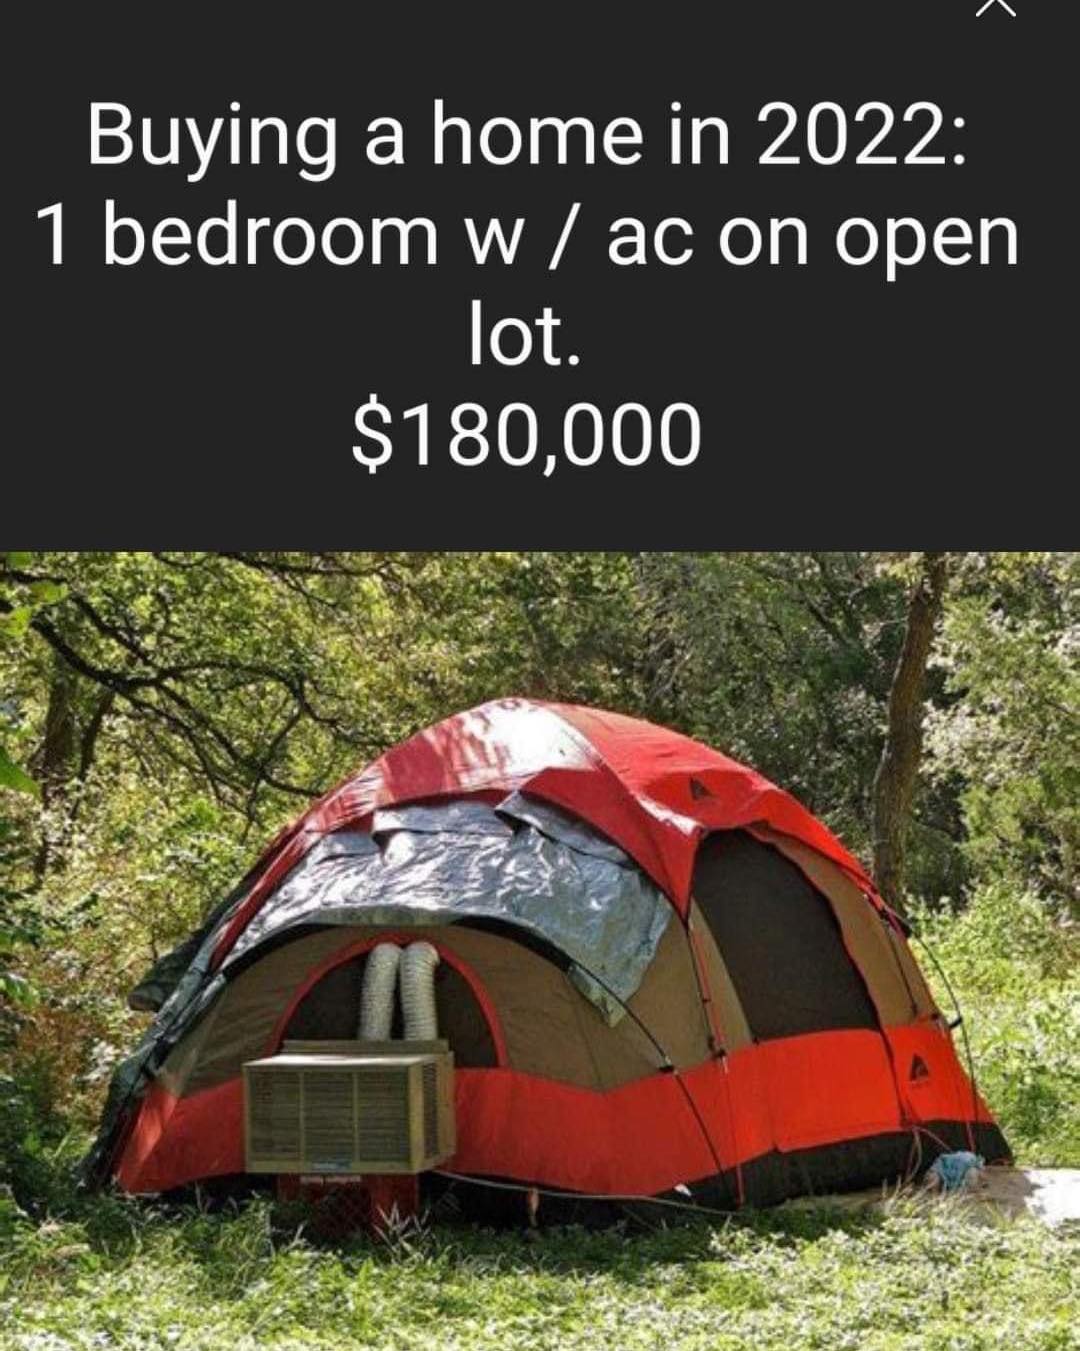 dank memes - funny memes - portable air conditioner for tent camping - Buying a home in 2022 1 bedroom w ac on open lot. $180,000